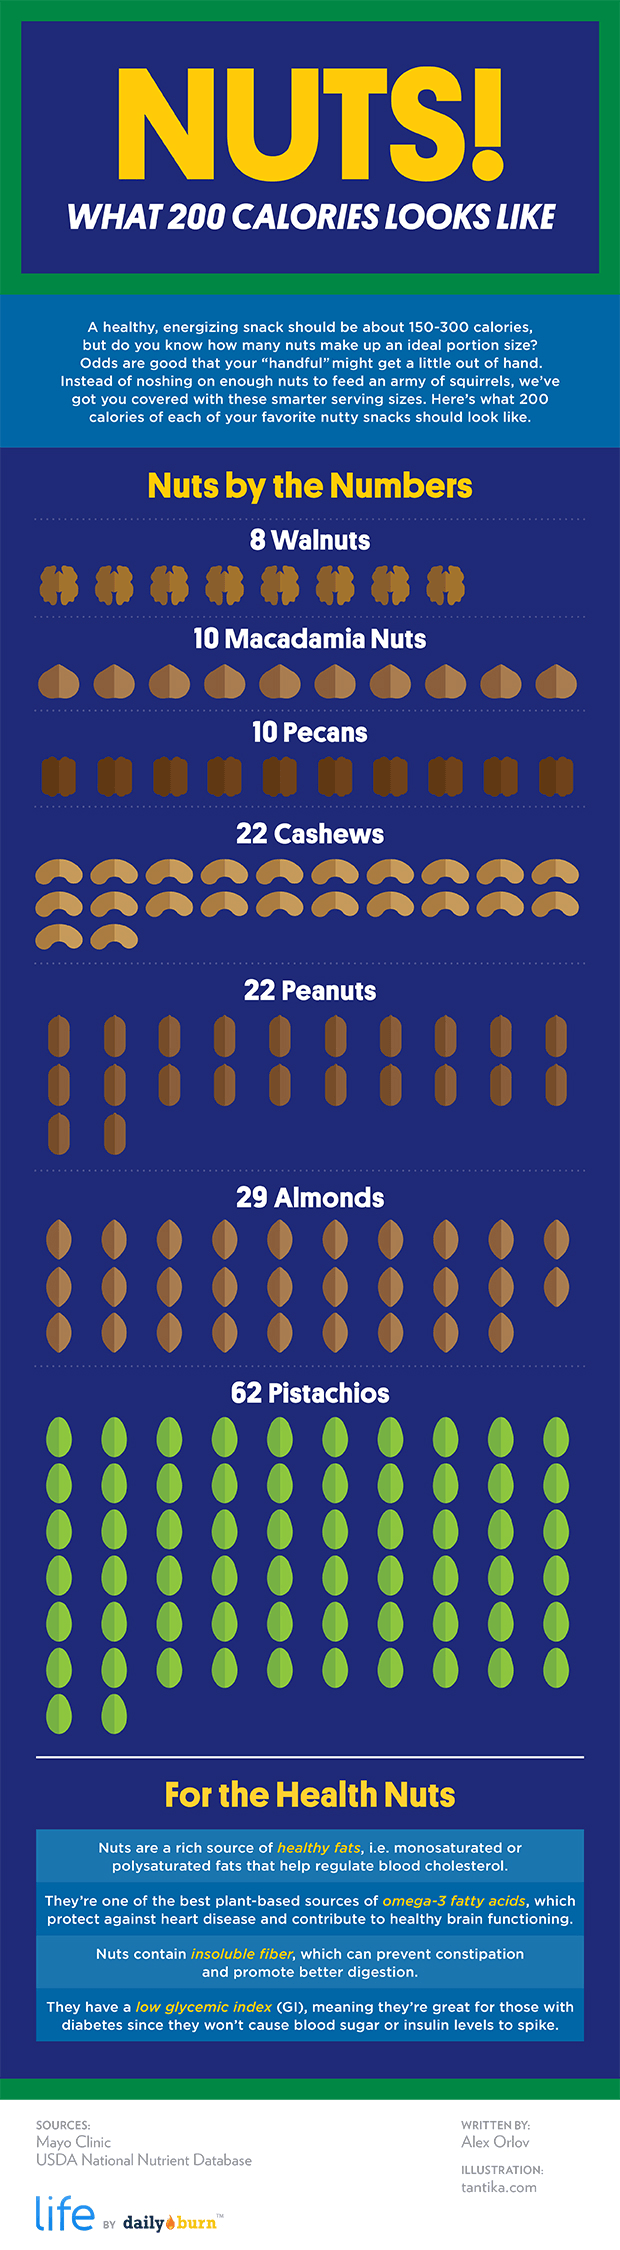 This Is What 200 Calories of Nuts Looks Like - INFOGRAPHIC